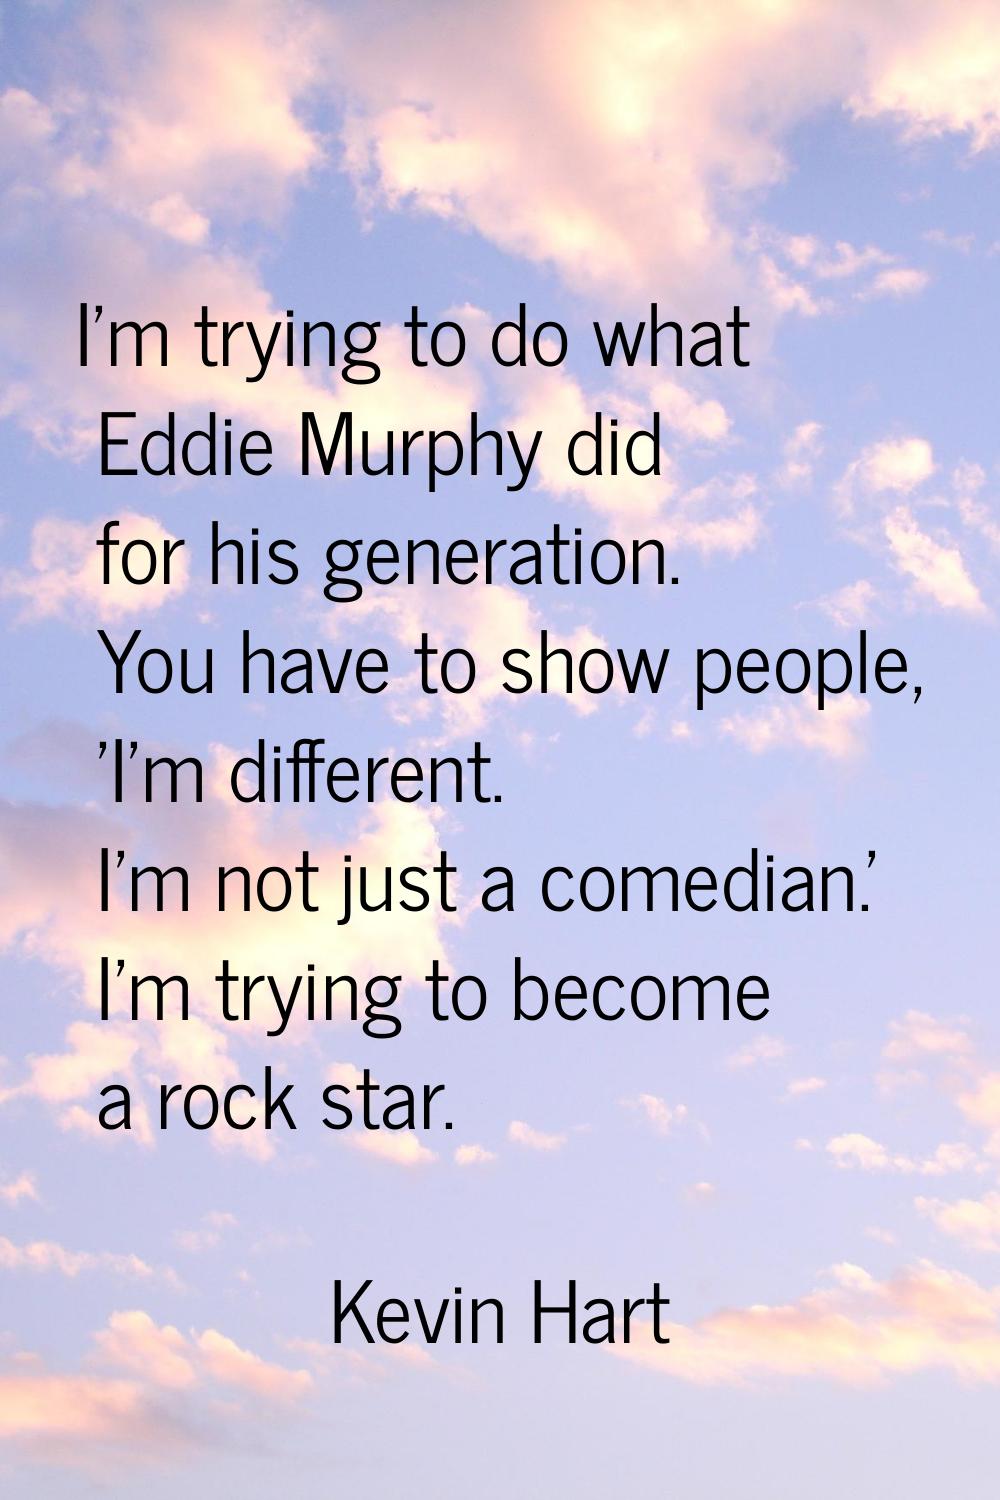 I'm trying to do what Eddie Murphy did for his generation. You have to show people, 'I'm different.